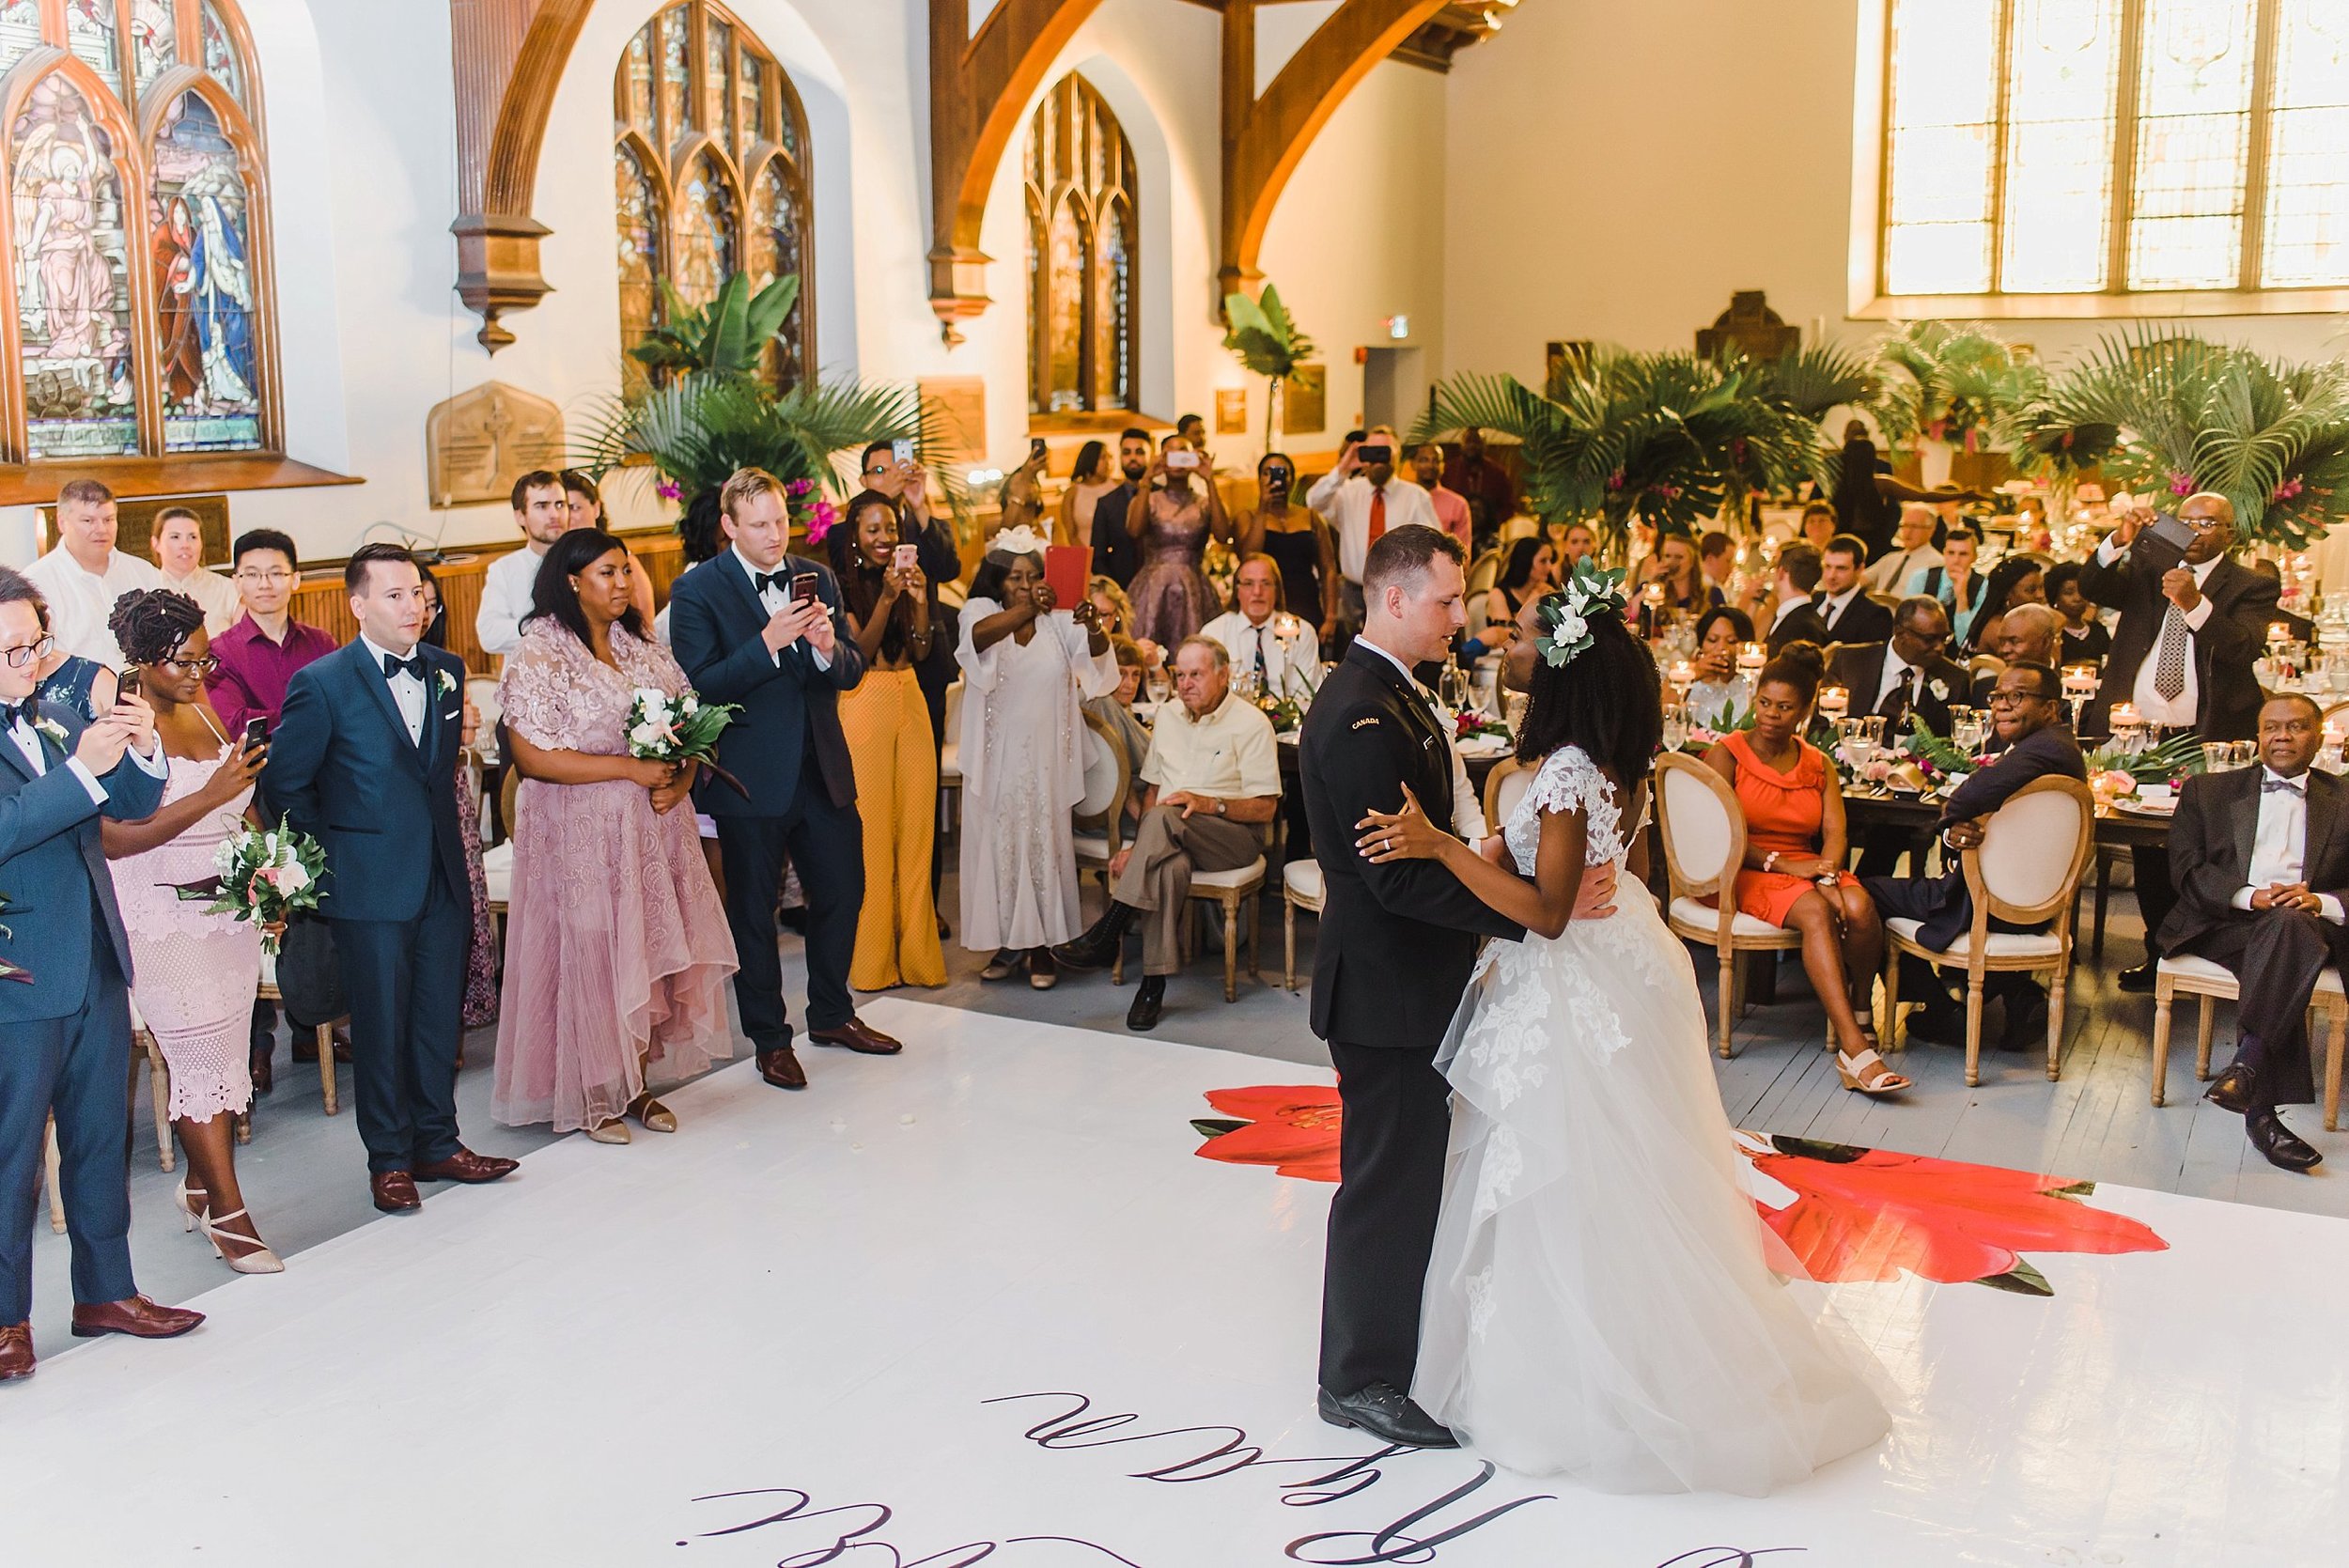  Ann-Lori and Ryan enjoyed a first dance immediately upon entering the reception.  The sun was just about setting and slipped warm rays through the stain-glassed windows for that light glow. 